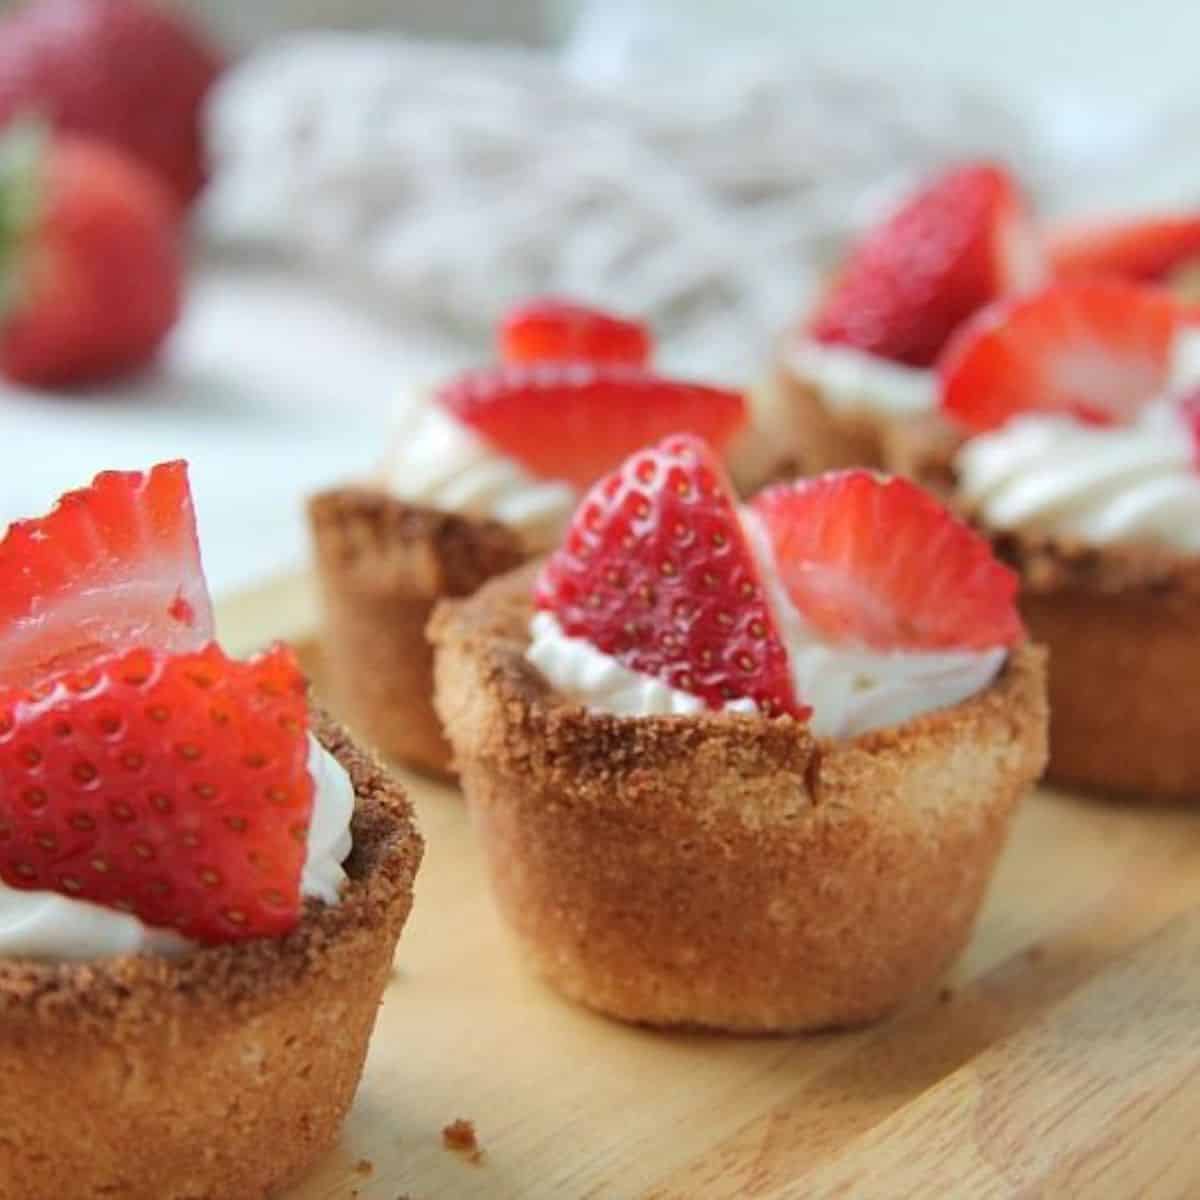 Mini cheesecakes topped with whipped cream and fresh strawberry slices, displayed on a wooden surface, inspired by keto strawberry shortcake.